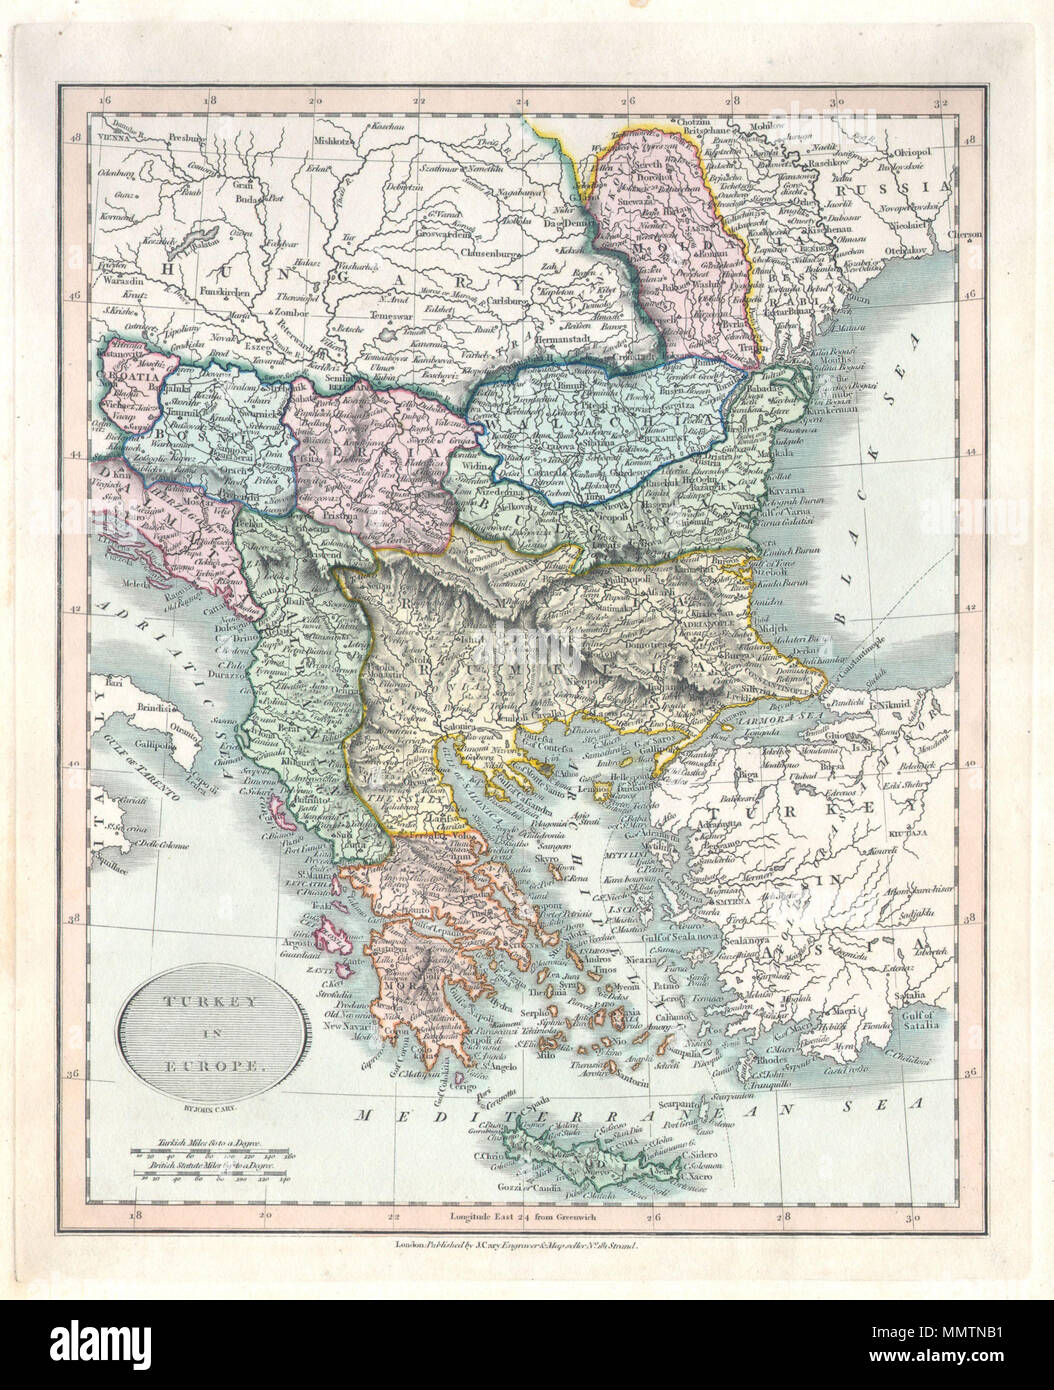 .  English: This is a hand colored 1836 map of Greece & the Balkans under the rule of Turkey by John Cary. Includes the modern day states of Greece, Albania, Moldova, Bosnia, Croatia, Serbia, Bulgaria & Romania. Published from Cary's office at 181 Strand Street, London.  Turkey in Europe. 1836. 1836 Cary Map of Greece and the Balkans - Geographicus - TurkeyinEurope-cary-1836 Stock Photo